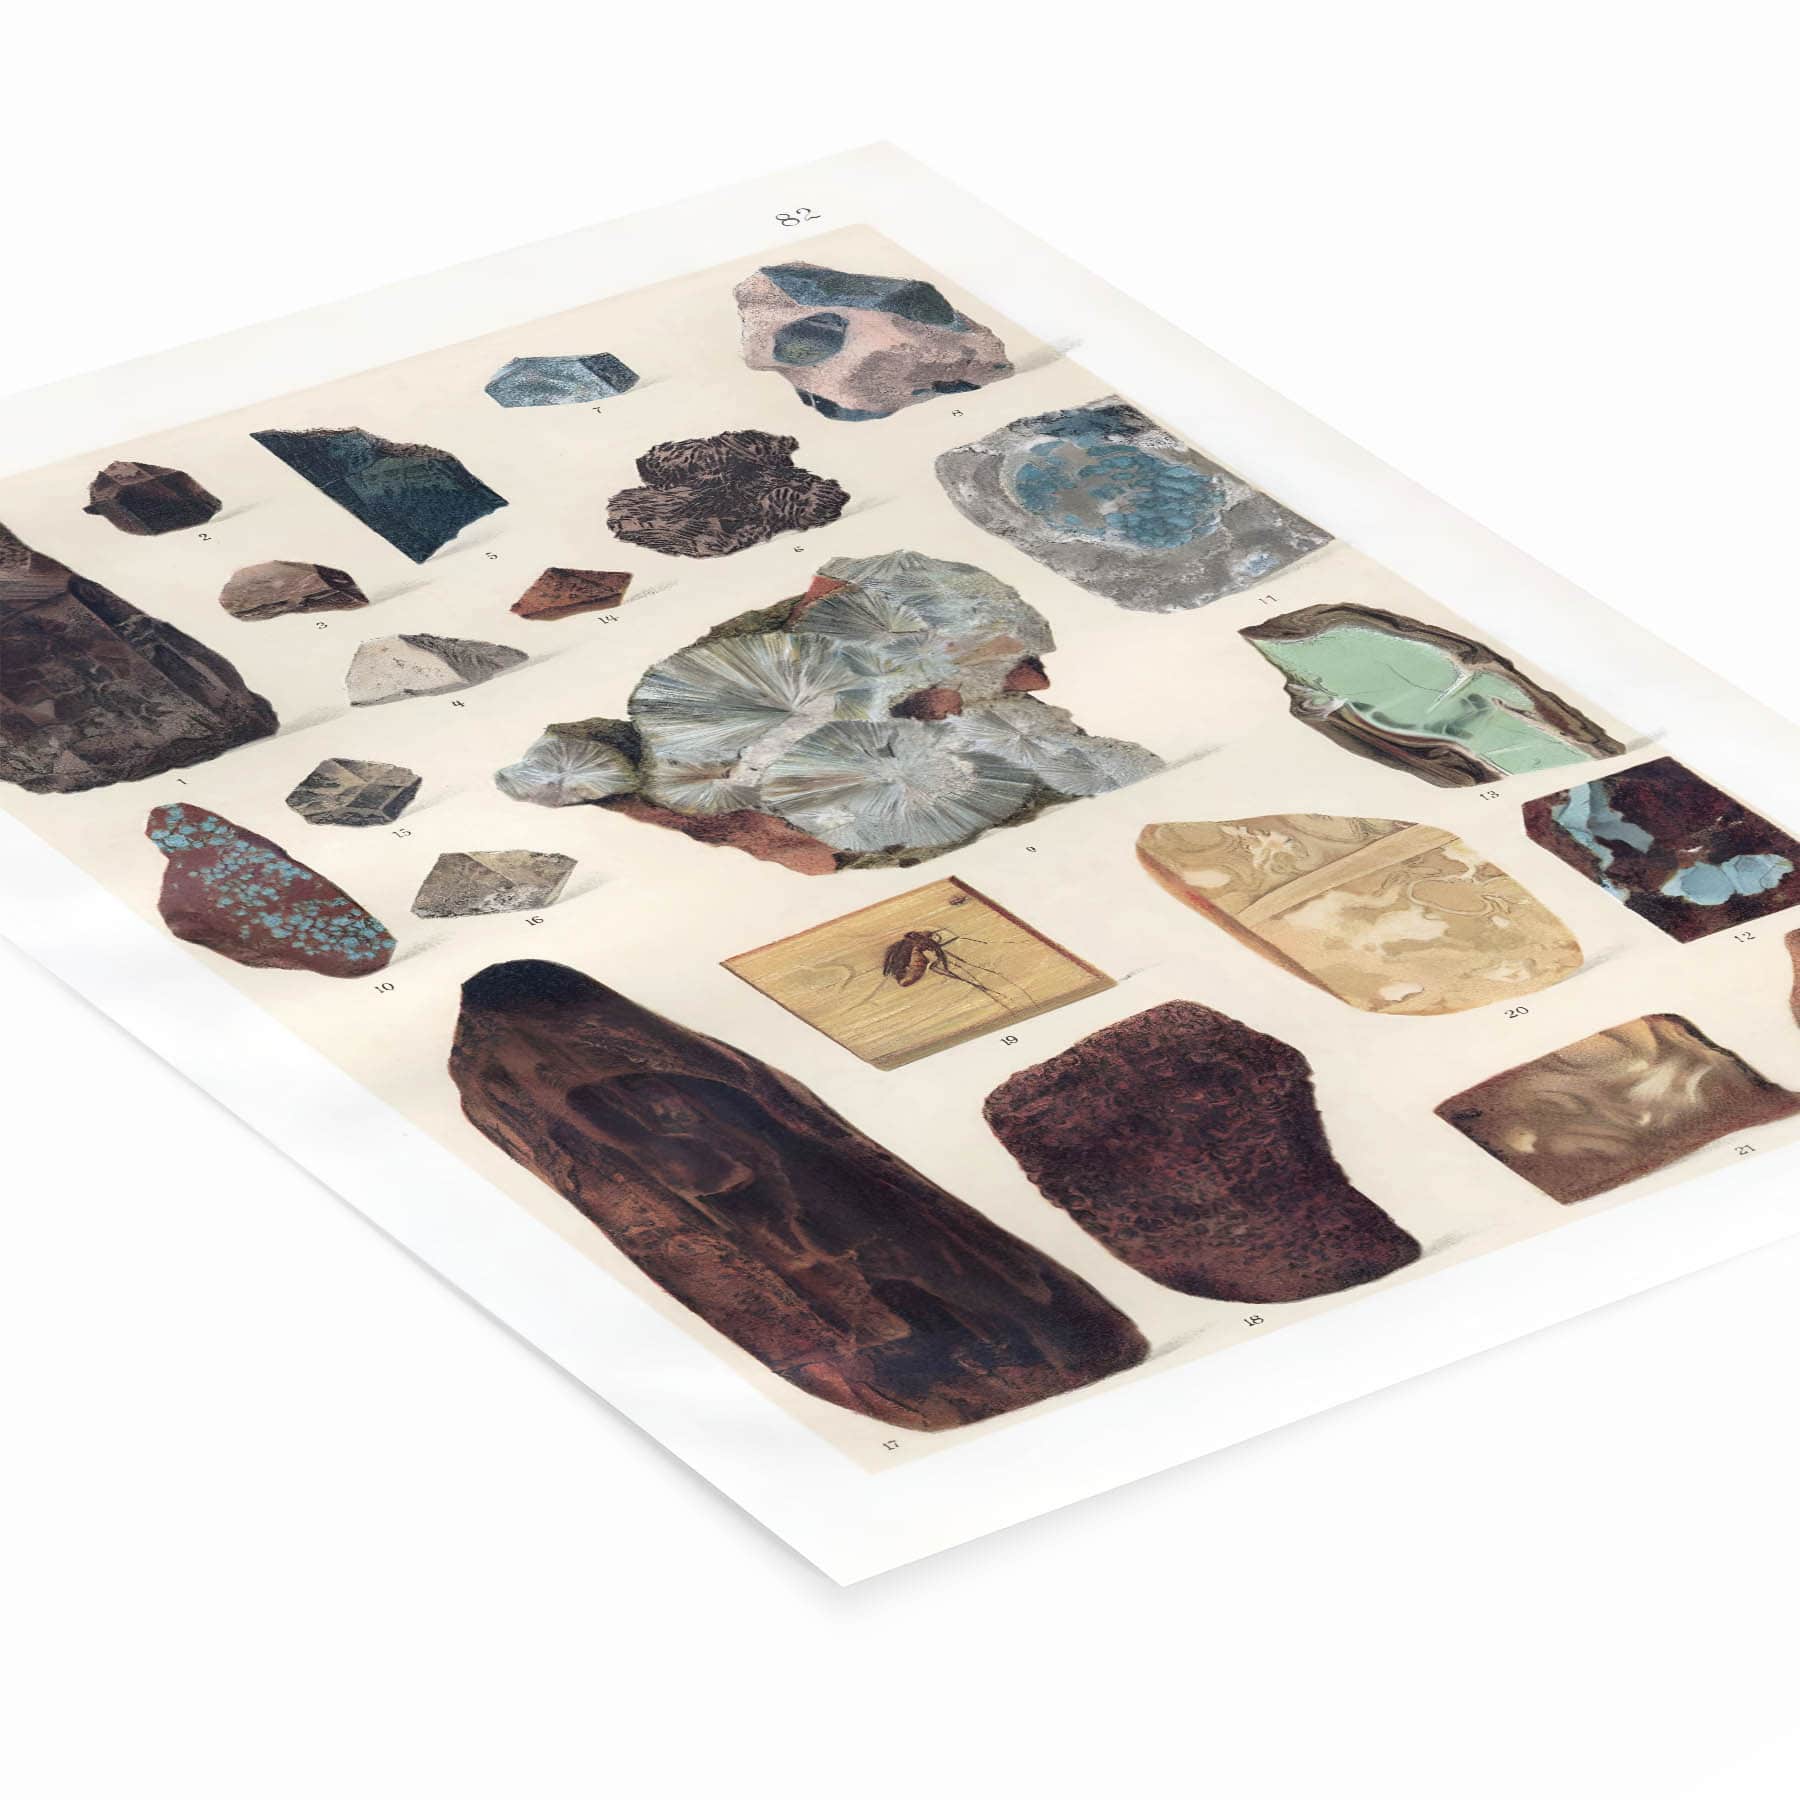 Unique Gemstone Art Print Laying Flat on a White Background